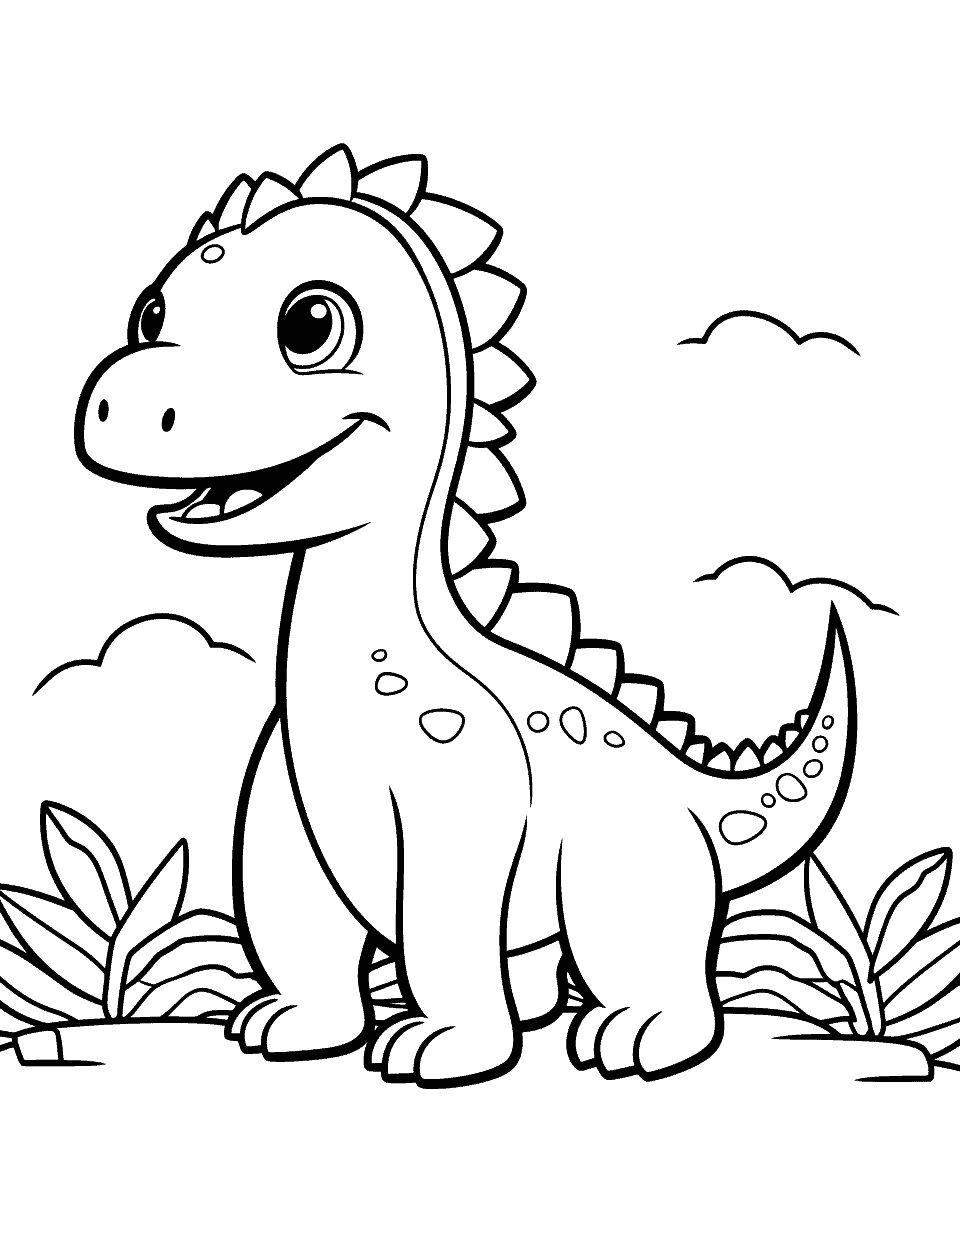 Easy Dino Drawing Coloring Page - An easy to color Dino drawing suitable for younger kids.